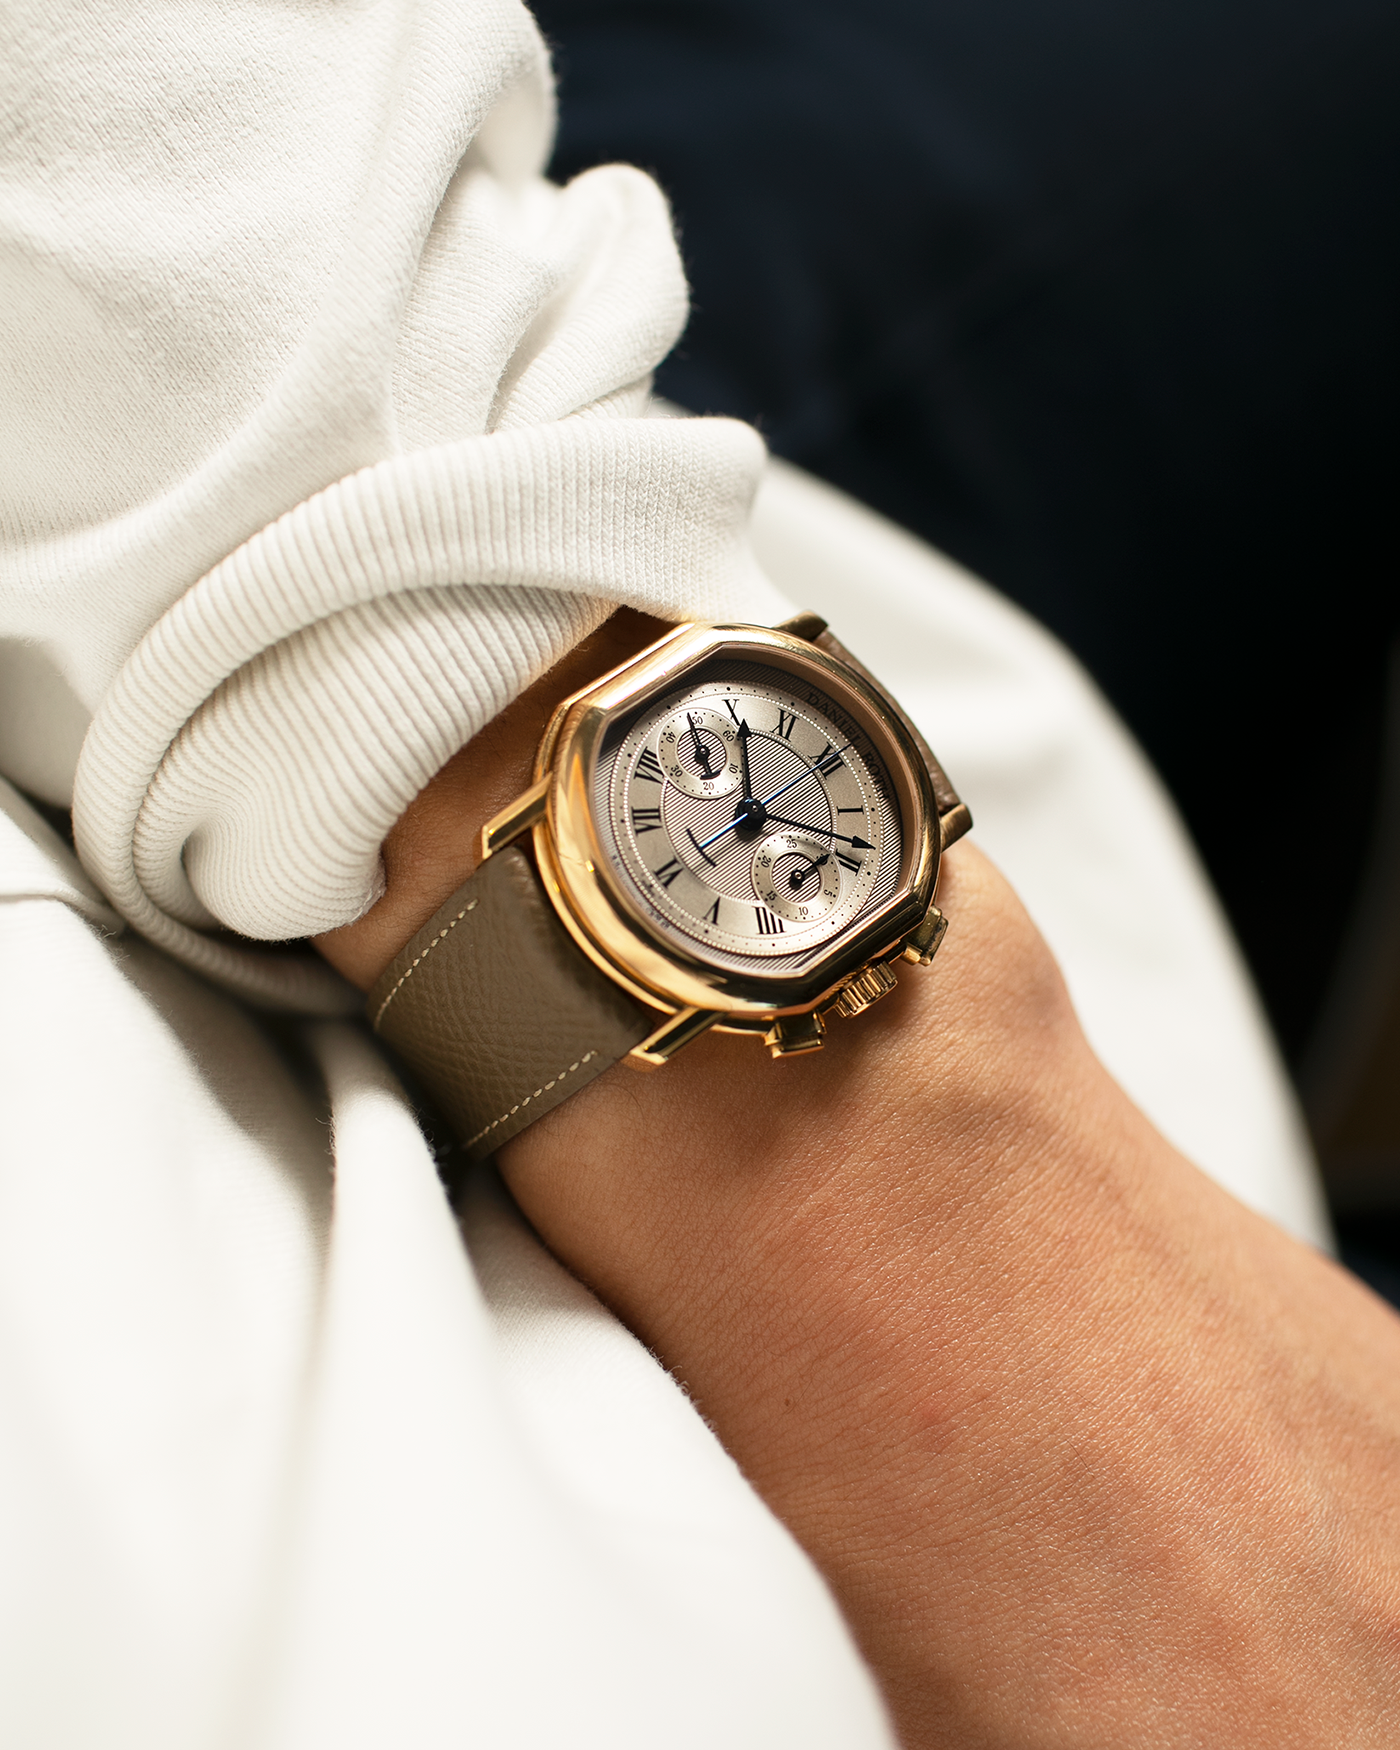 Brand: Daniel Roth Year: 1990’s Model: 2147 Material: 18k Yellow Gold Movement: Lemania 2320 Case Diameter: 35mm X 38mm Strap: Nostime Taupe Texture Calf and 18k Yellow Gold Daniel Roth Tang Buckle